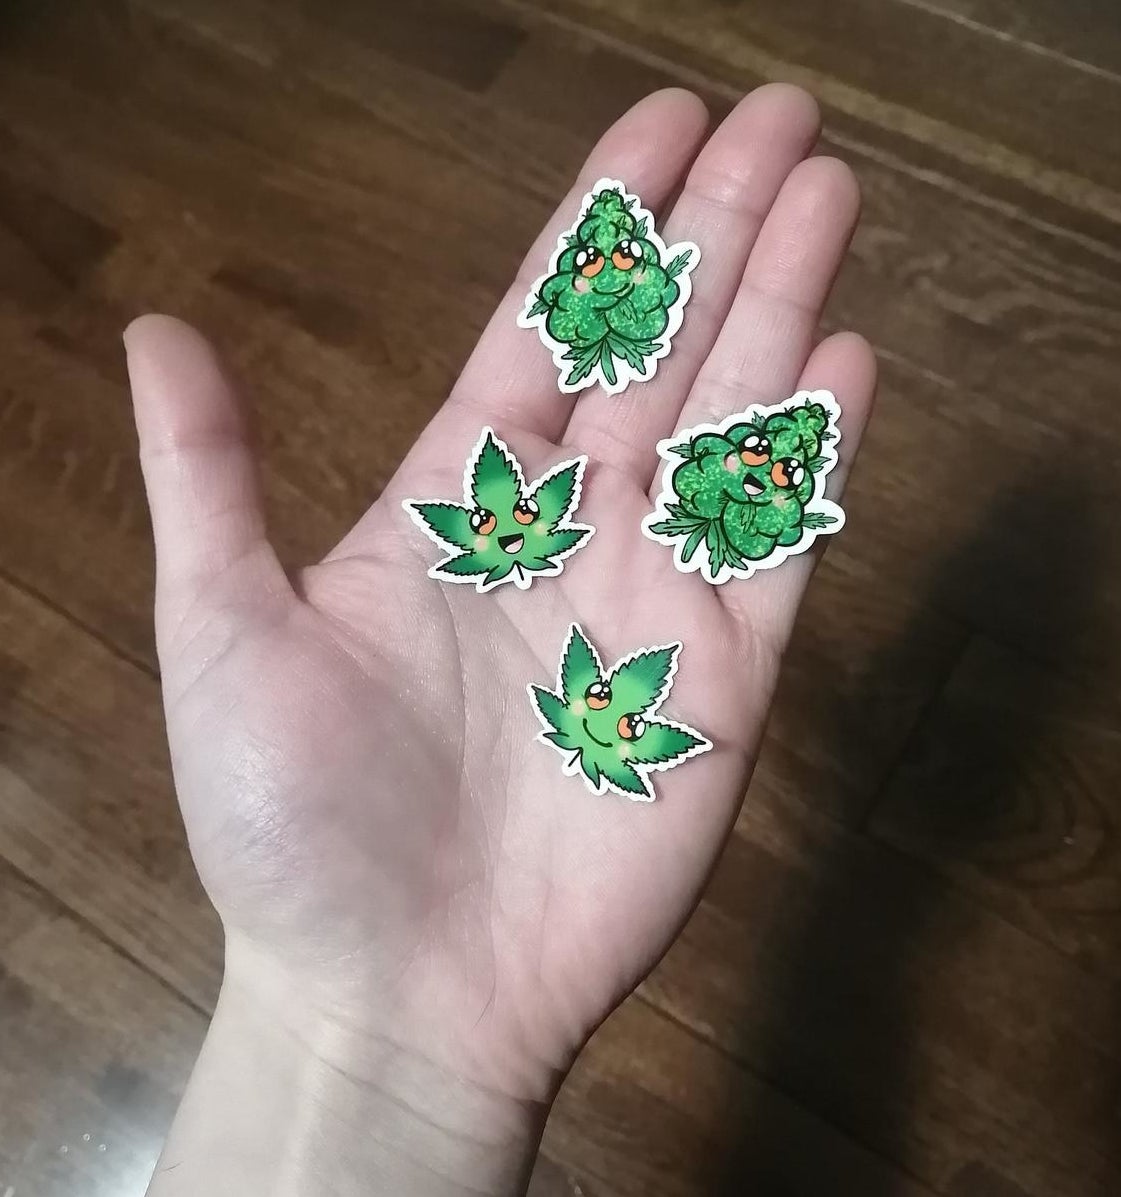 A person holding four stickers